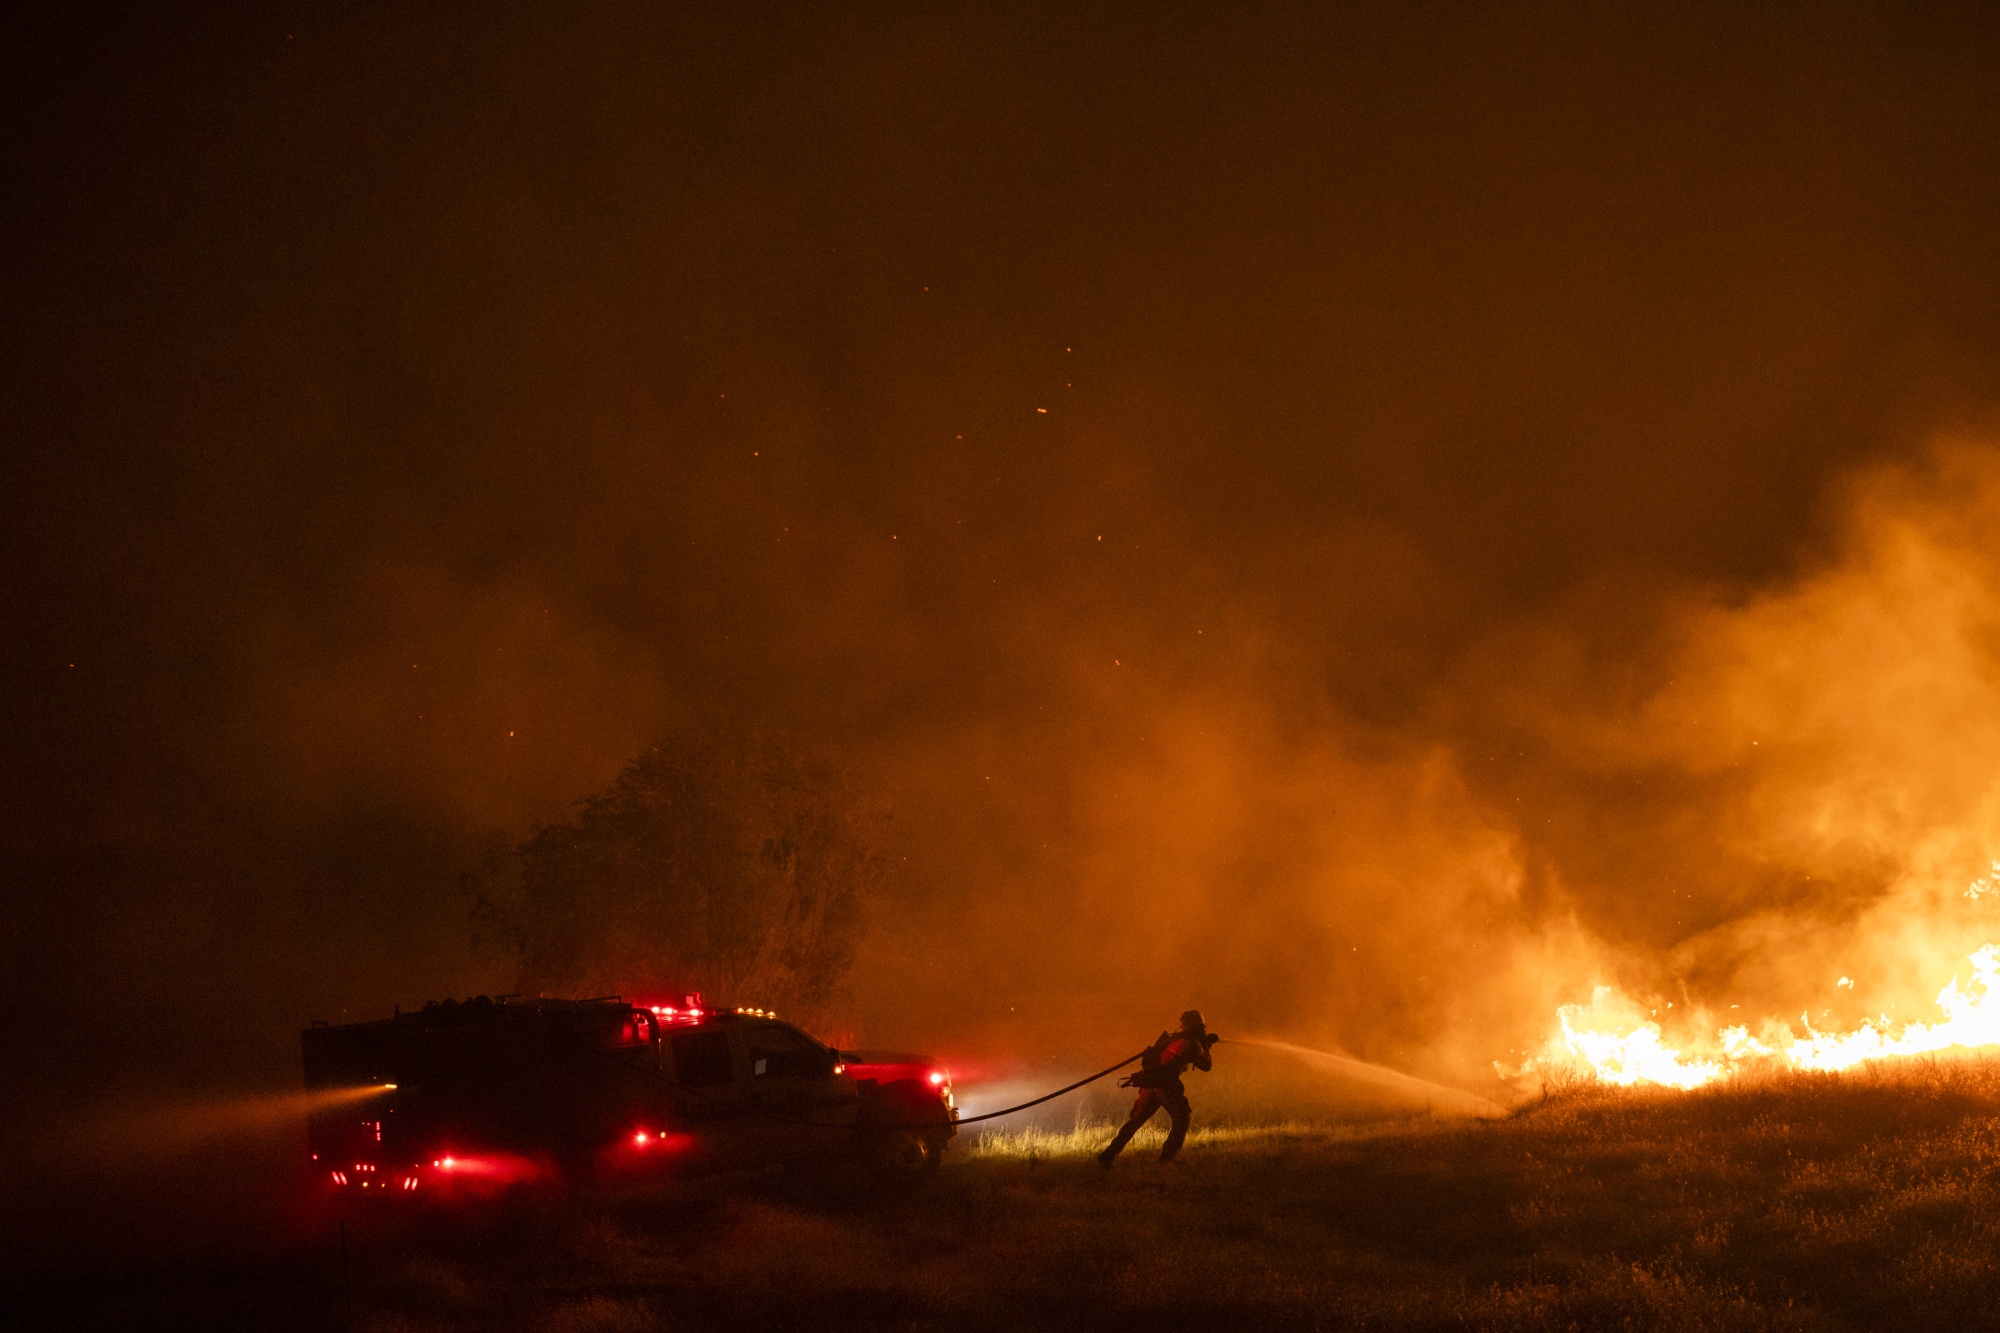 A firefighter douses flames burning on a property off Cantelow Road during the Hennessey fire in Solano County, California, U.S., on Wednesday, Aug. 19, 2020. More Northern Californians were chased out of their homes by lightning-sparked wildfires that burned out of control in several counties amid a punishing heat wave that pushed temperatures into the triple digits.